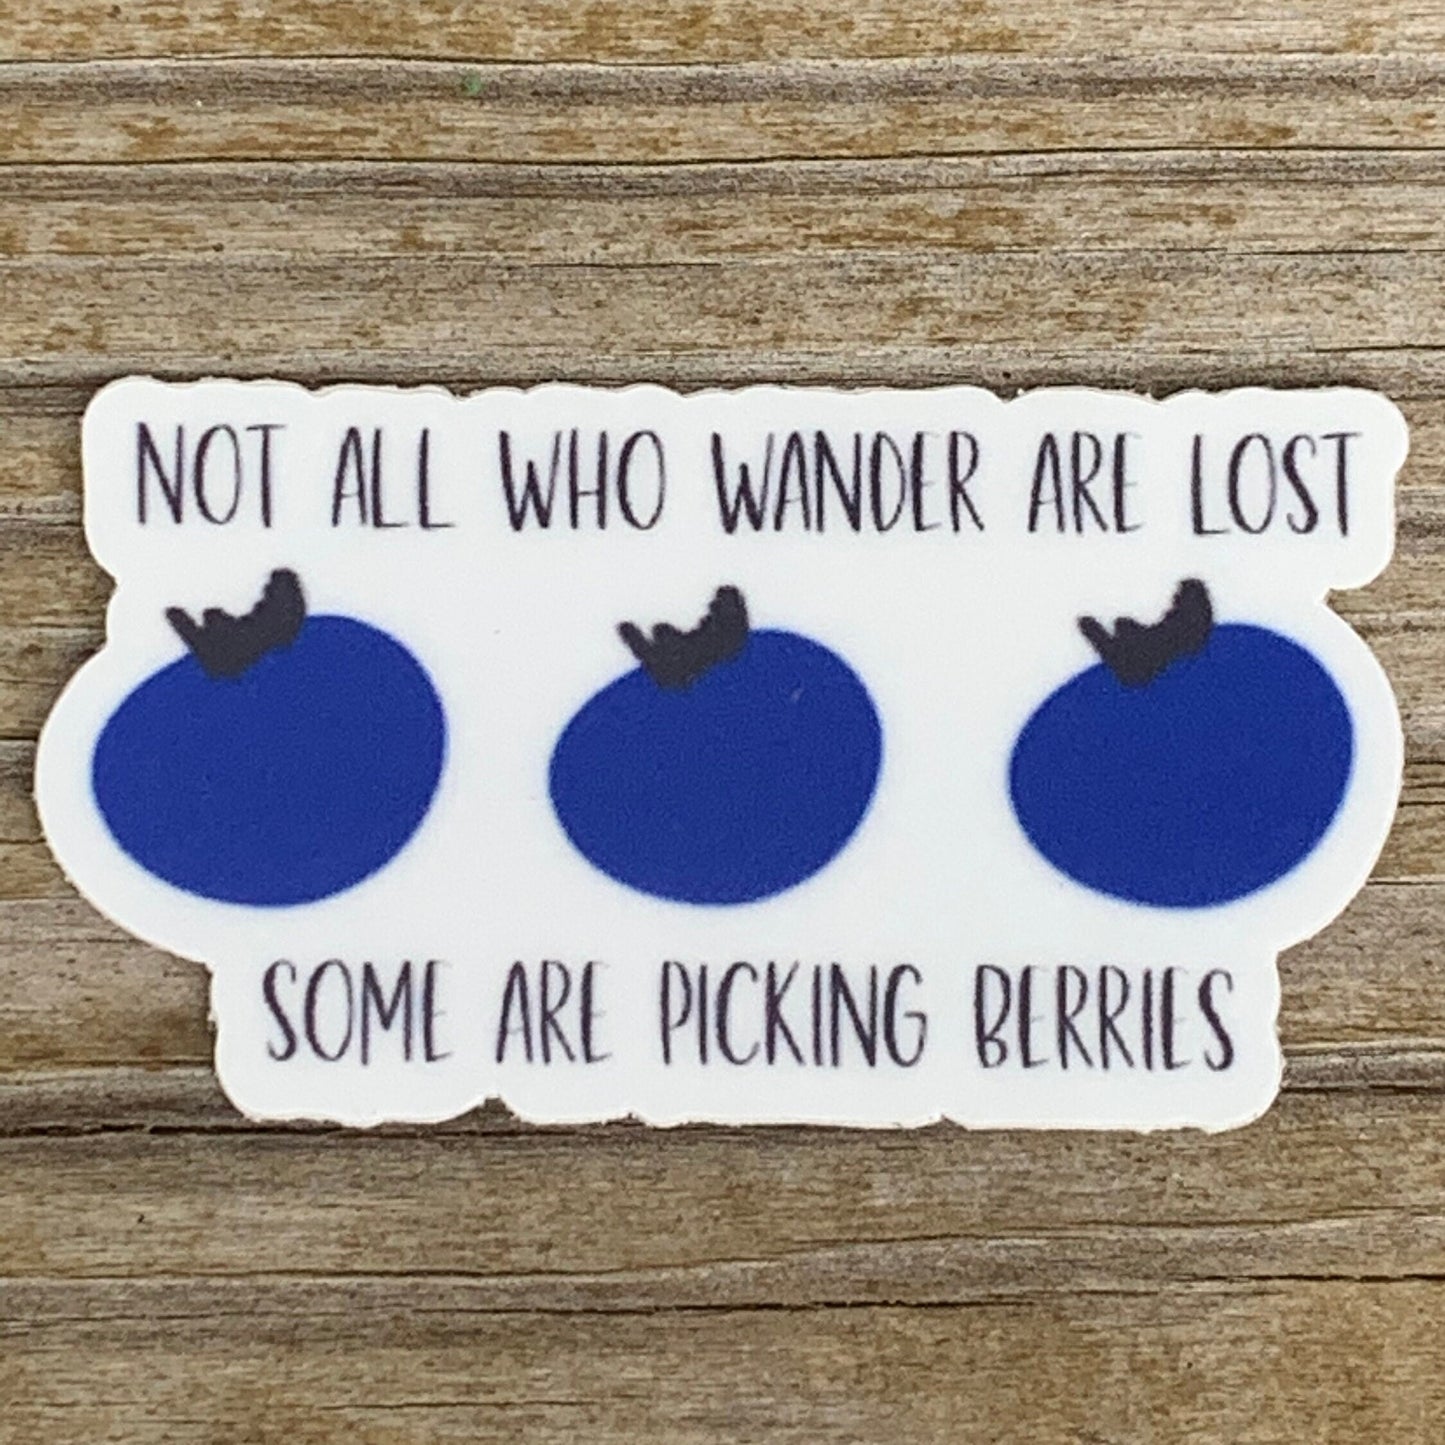 Blueberry vinyl magnet | magnet |  Not all who wander | Maine |  Michigan | refrigerator magnet |  blueberries  | picking berries | berry